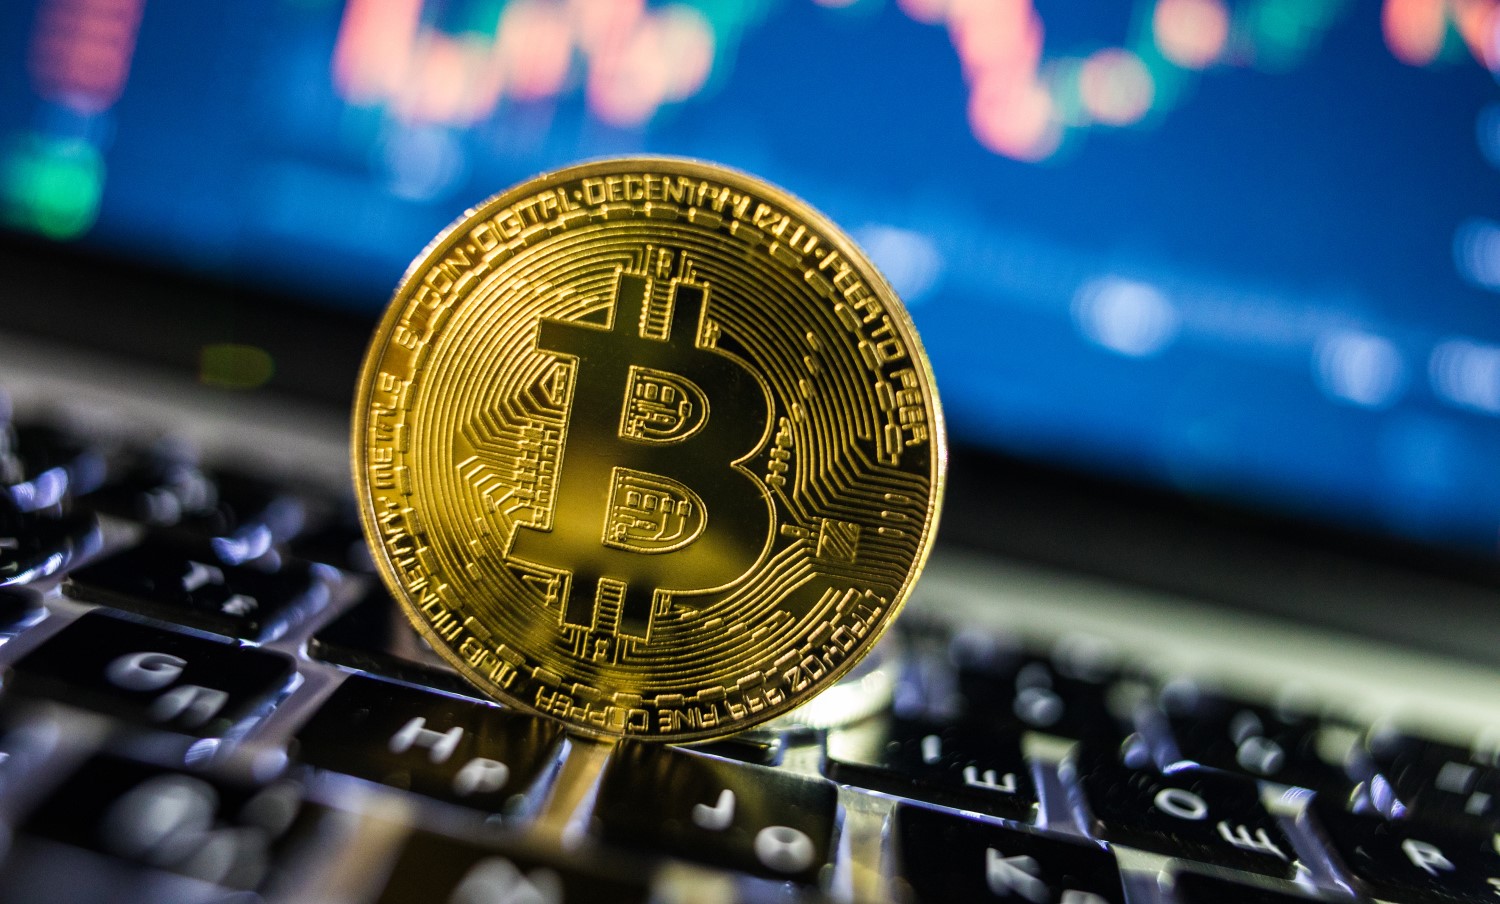 Bitcoin Back At $21K After 75% Drop, Where Does It Go From Here?